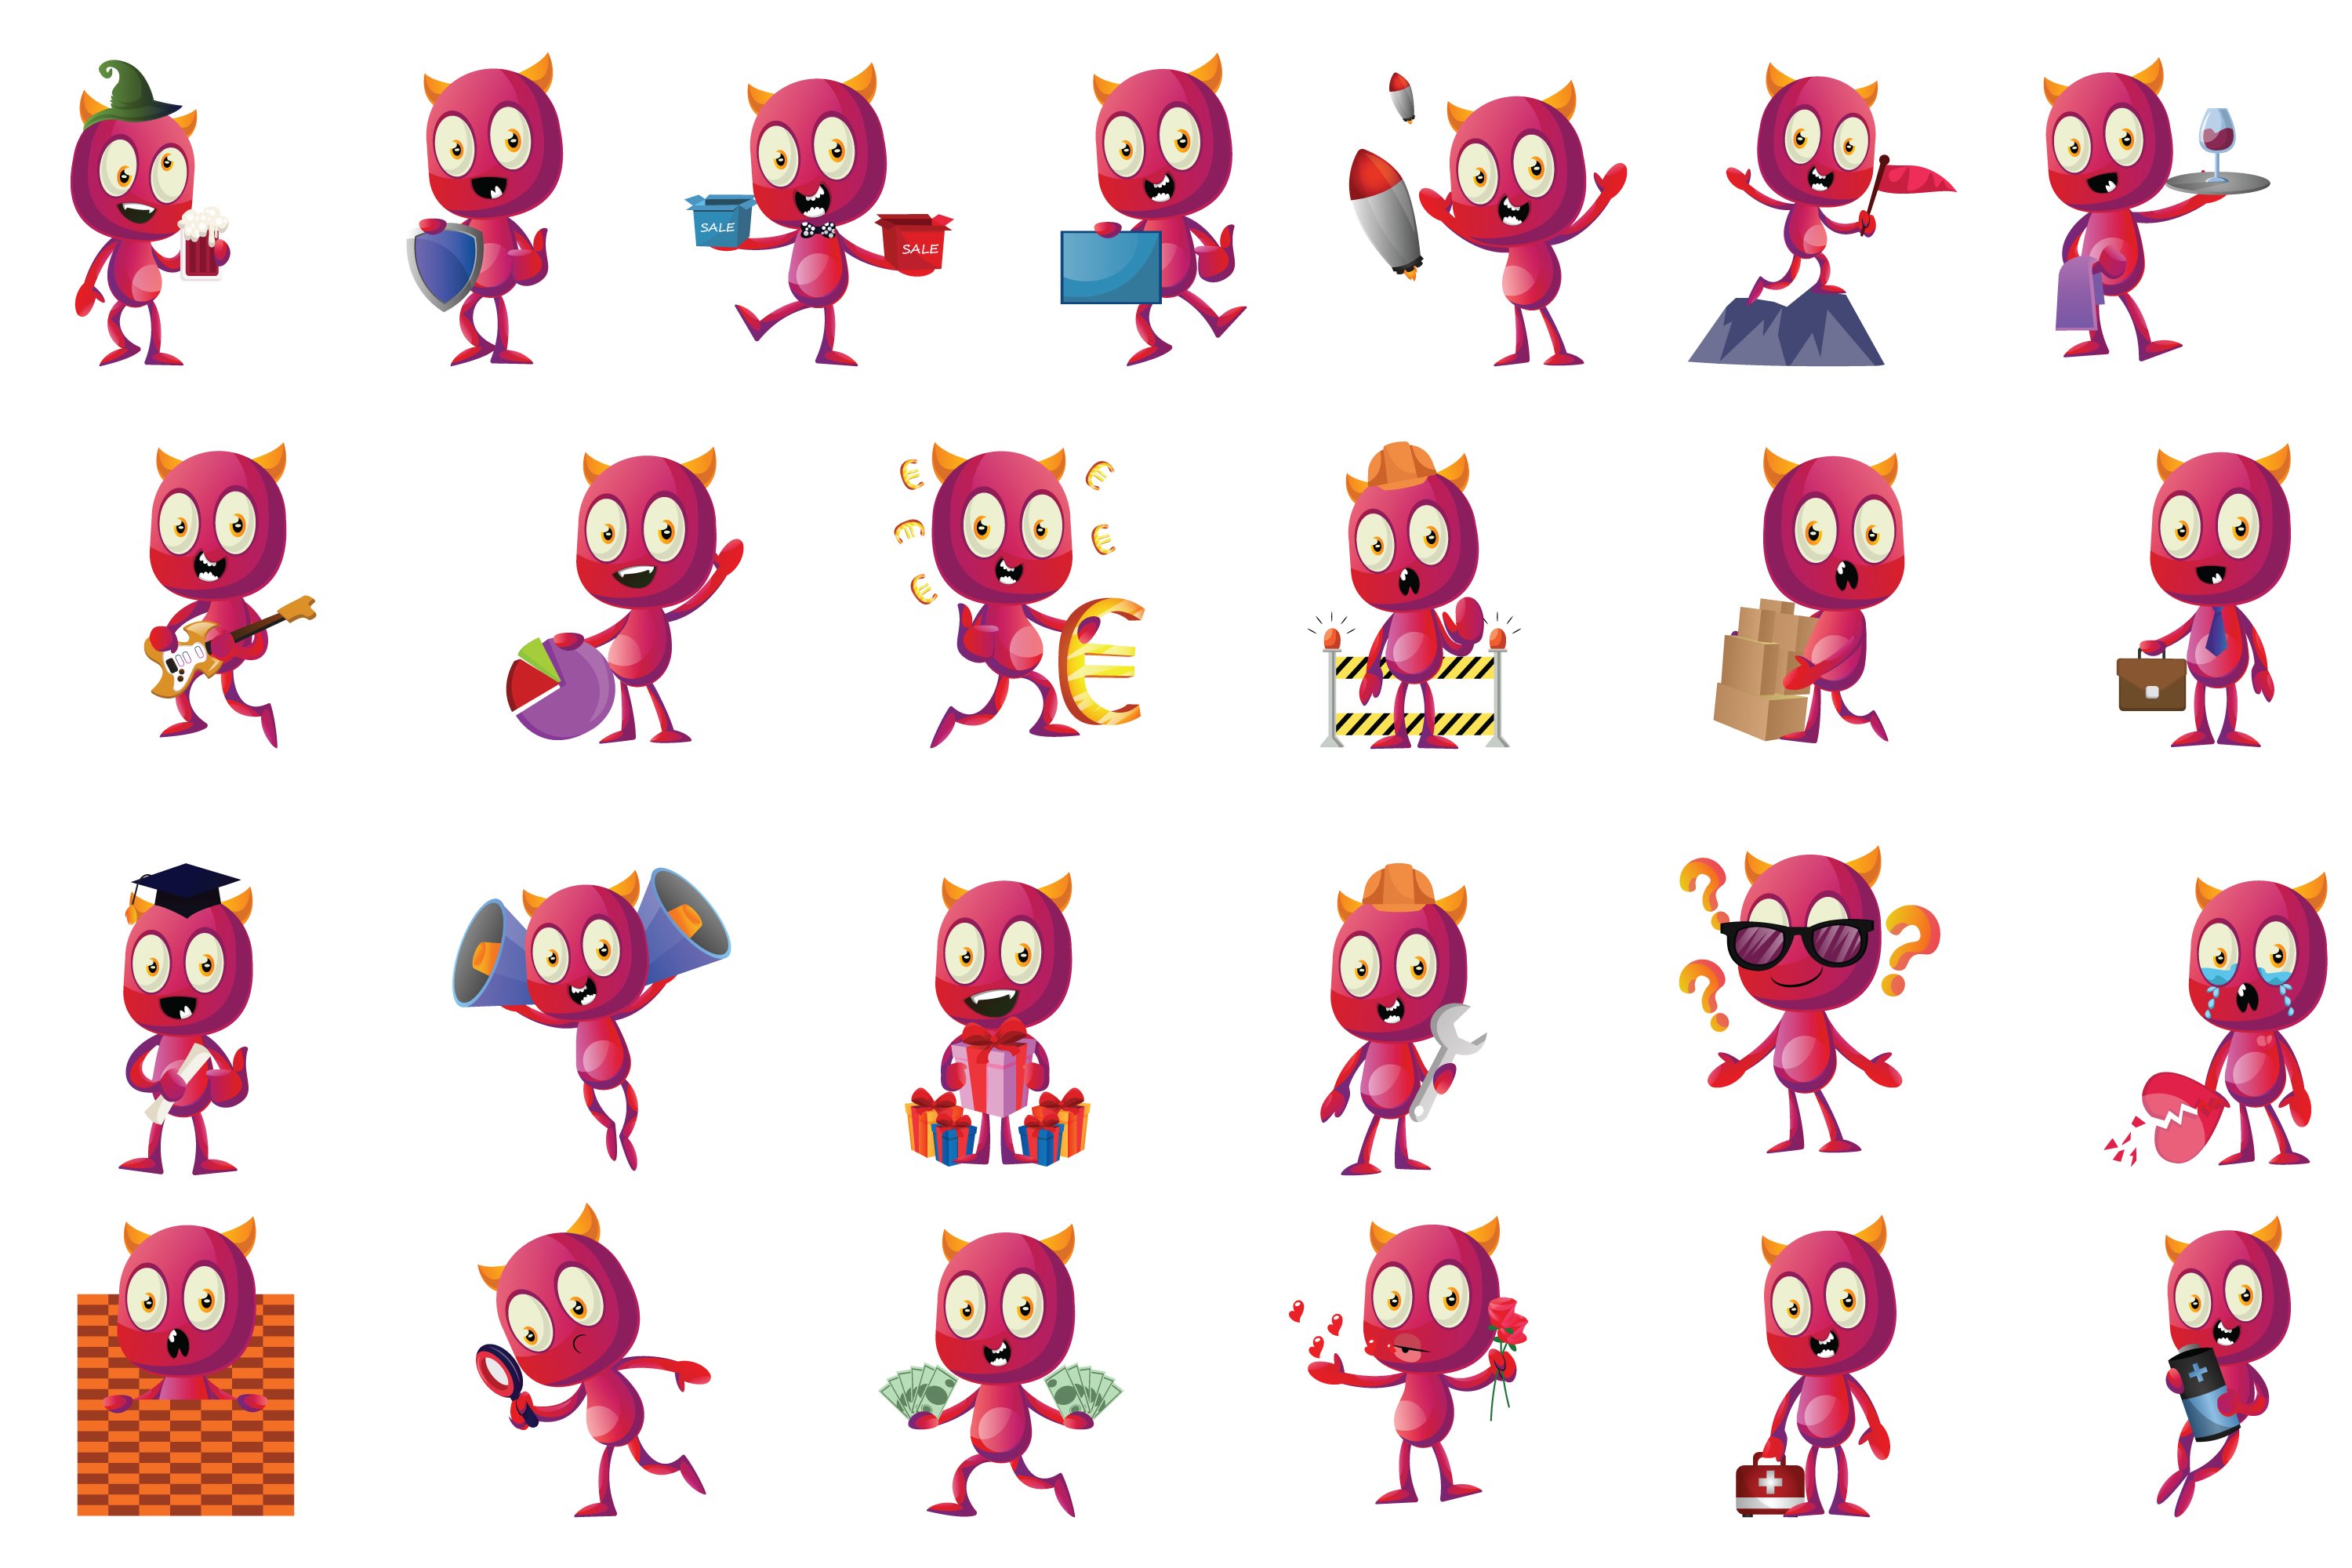 Variations of the devil character.